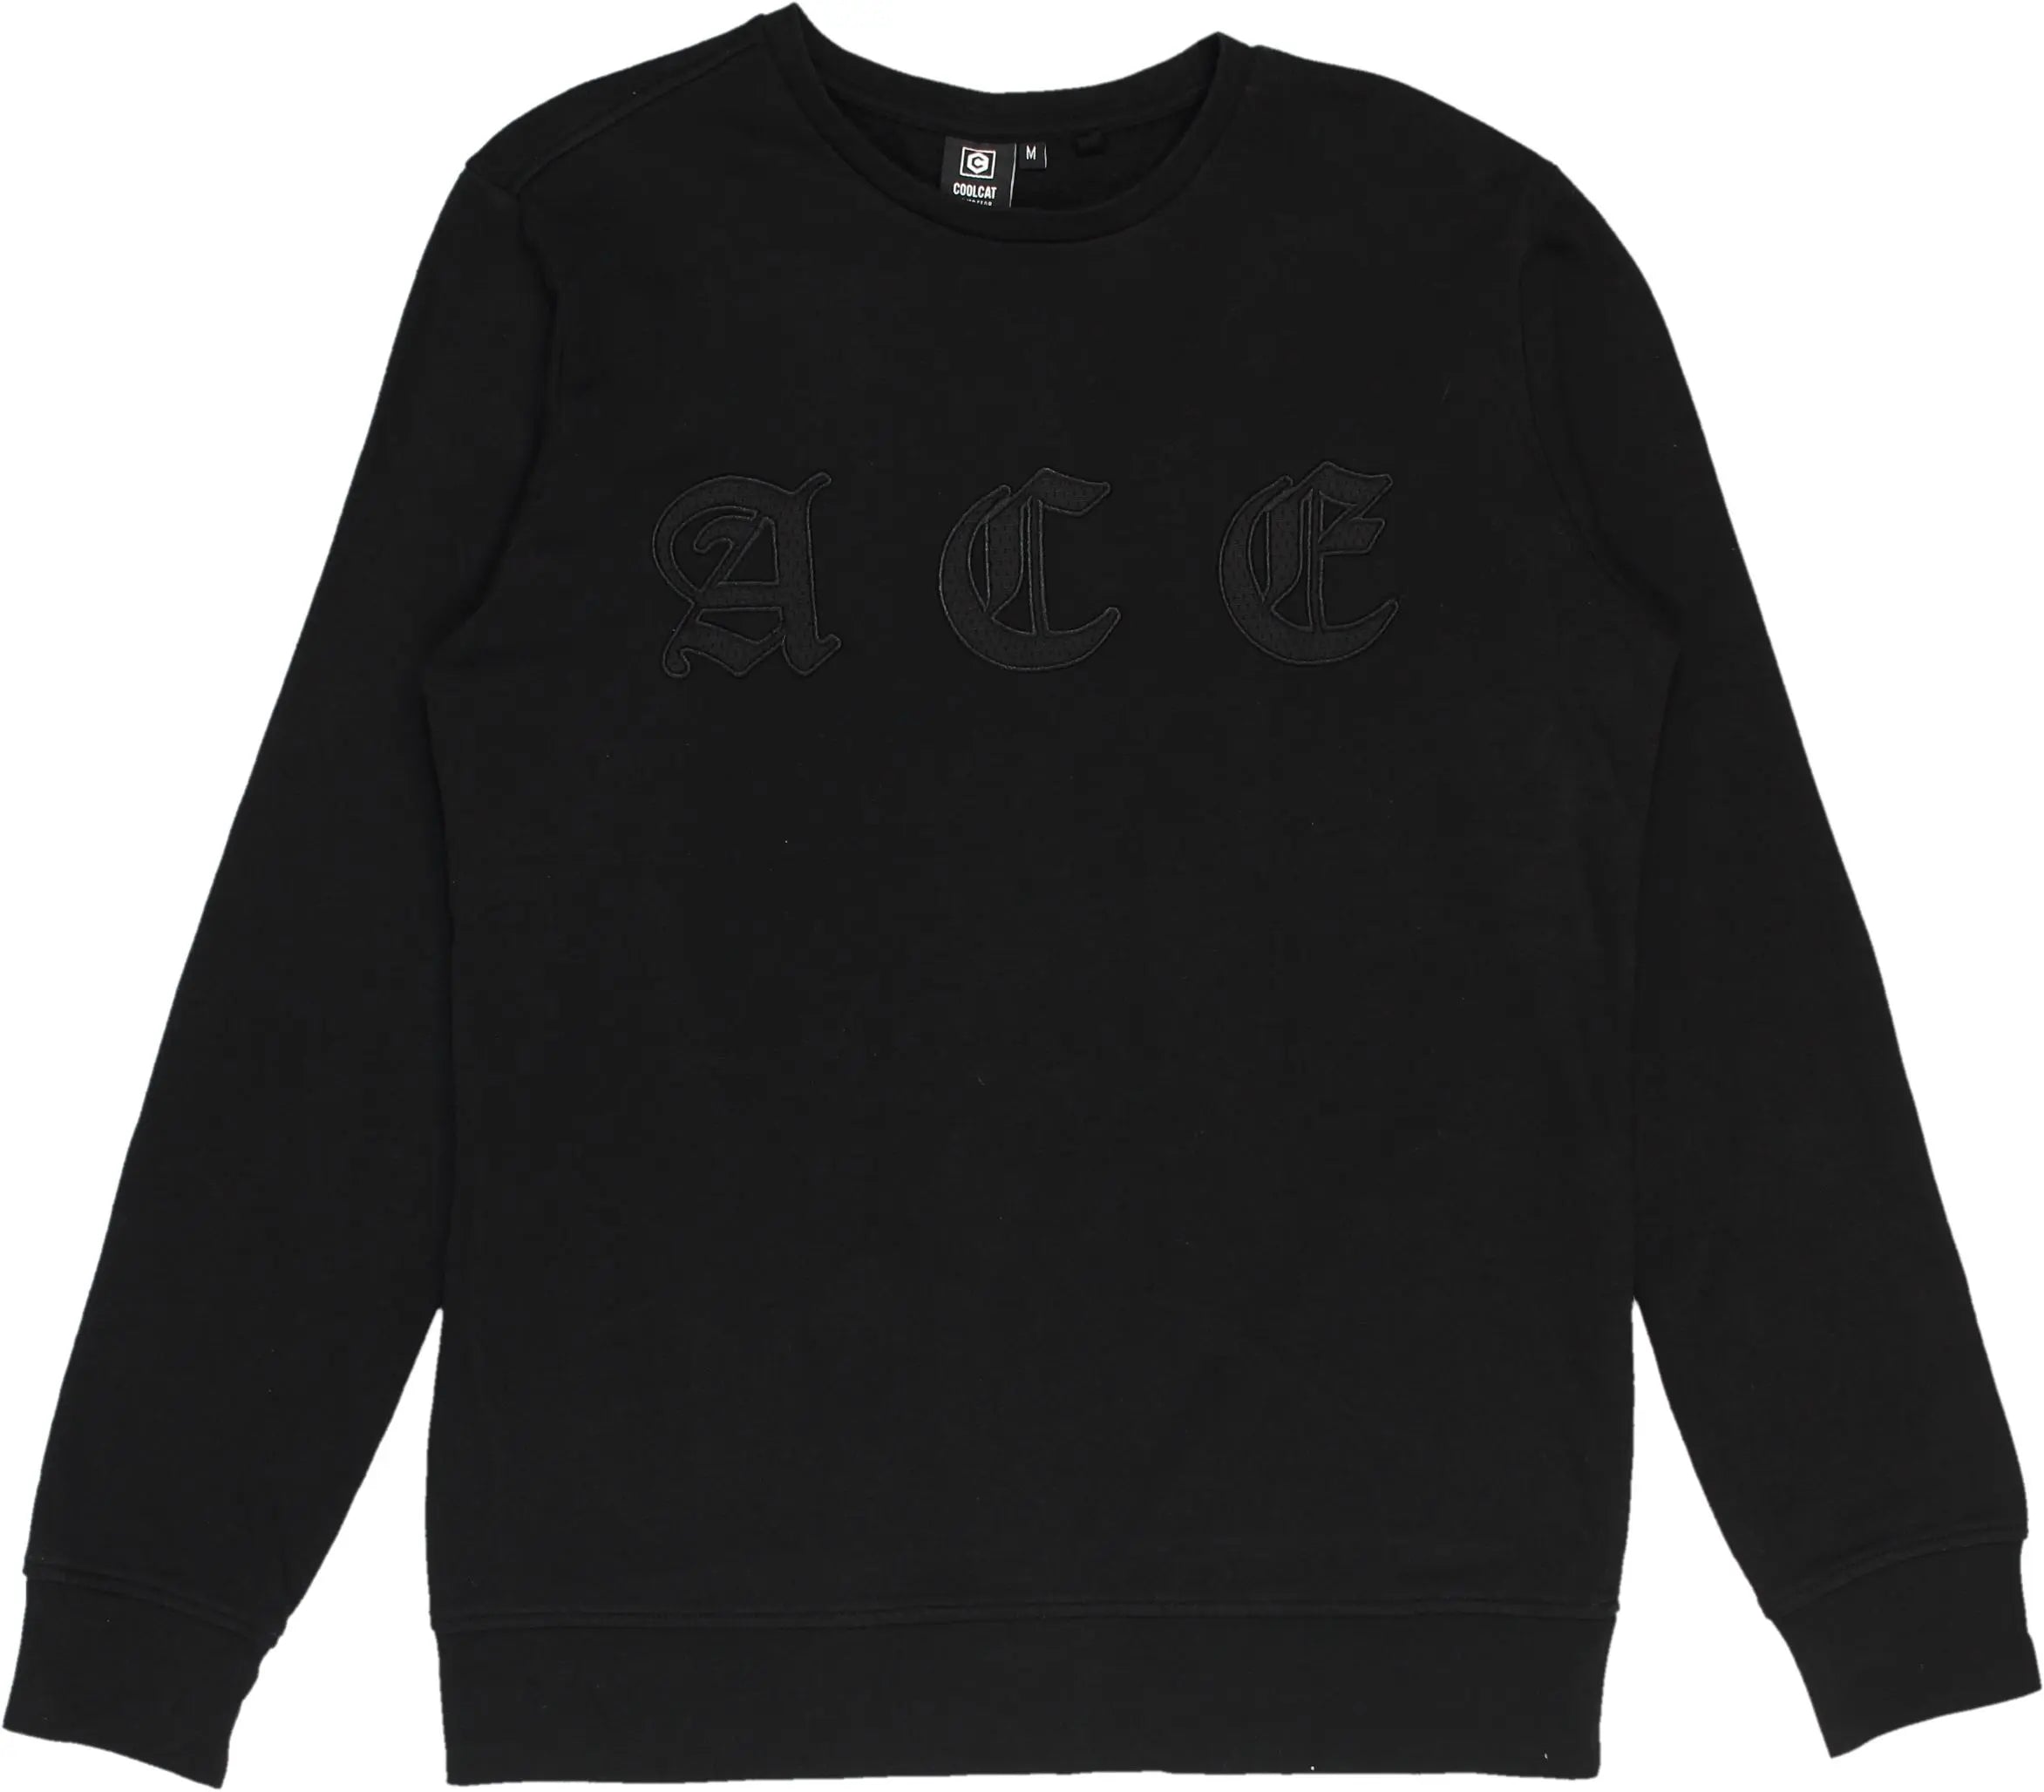 Coolcat - Black Sweater- ThriftTale.com - Vintage and second handclothing